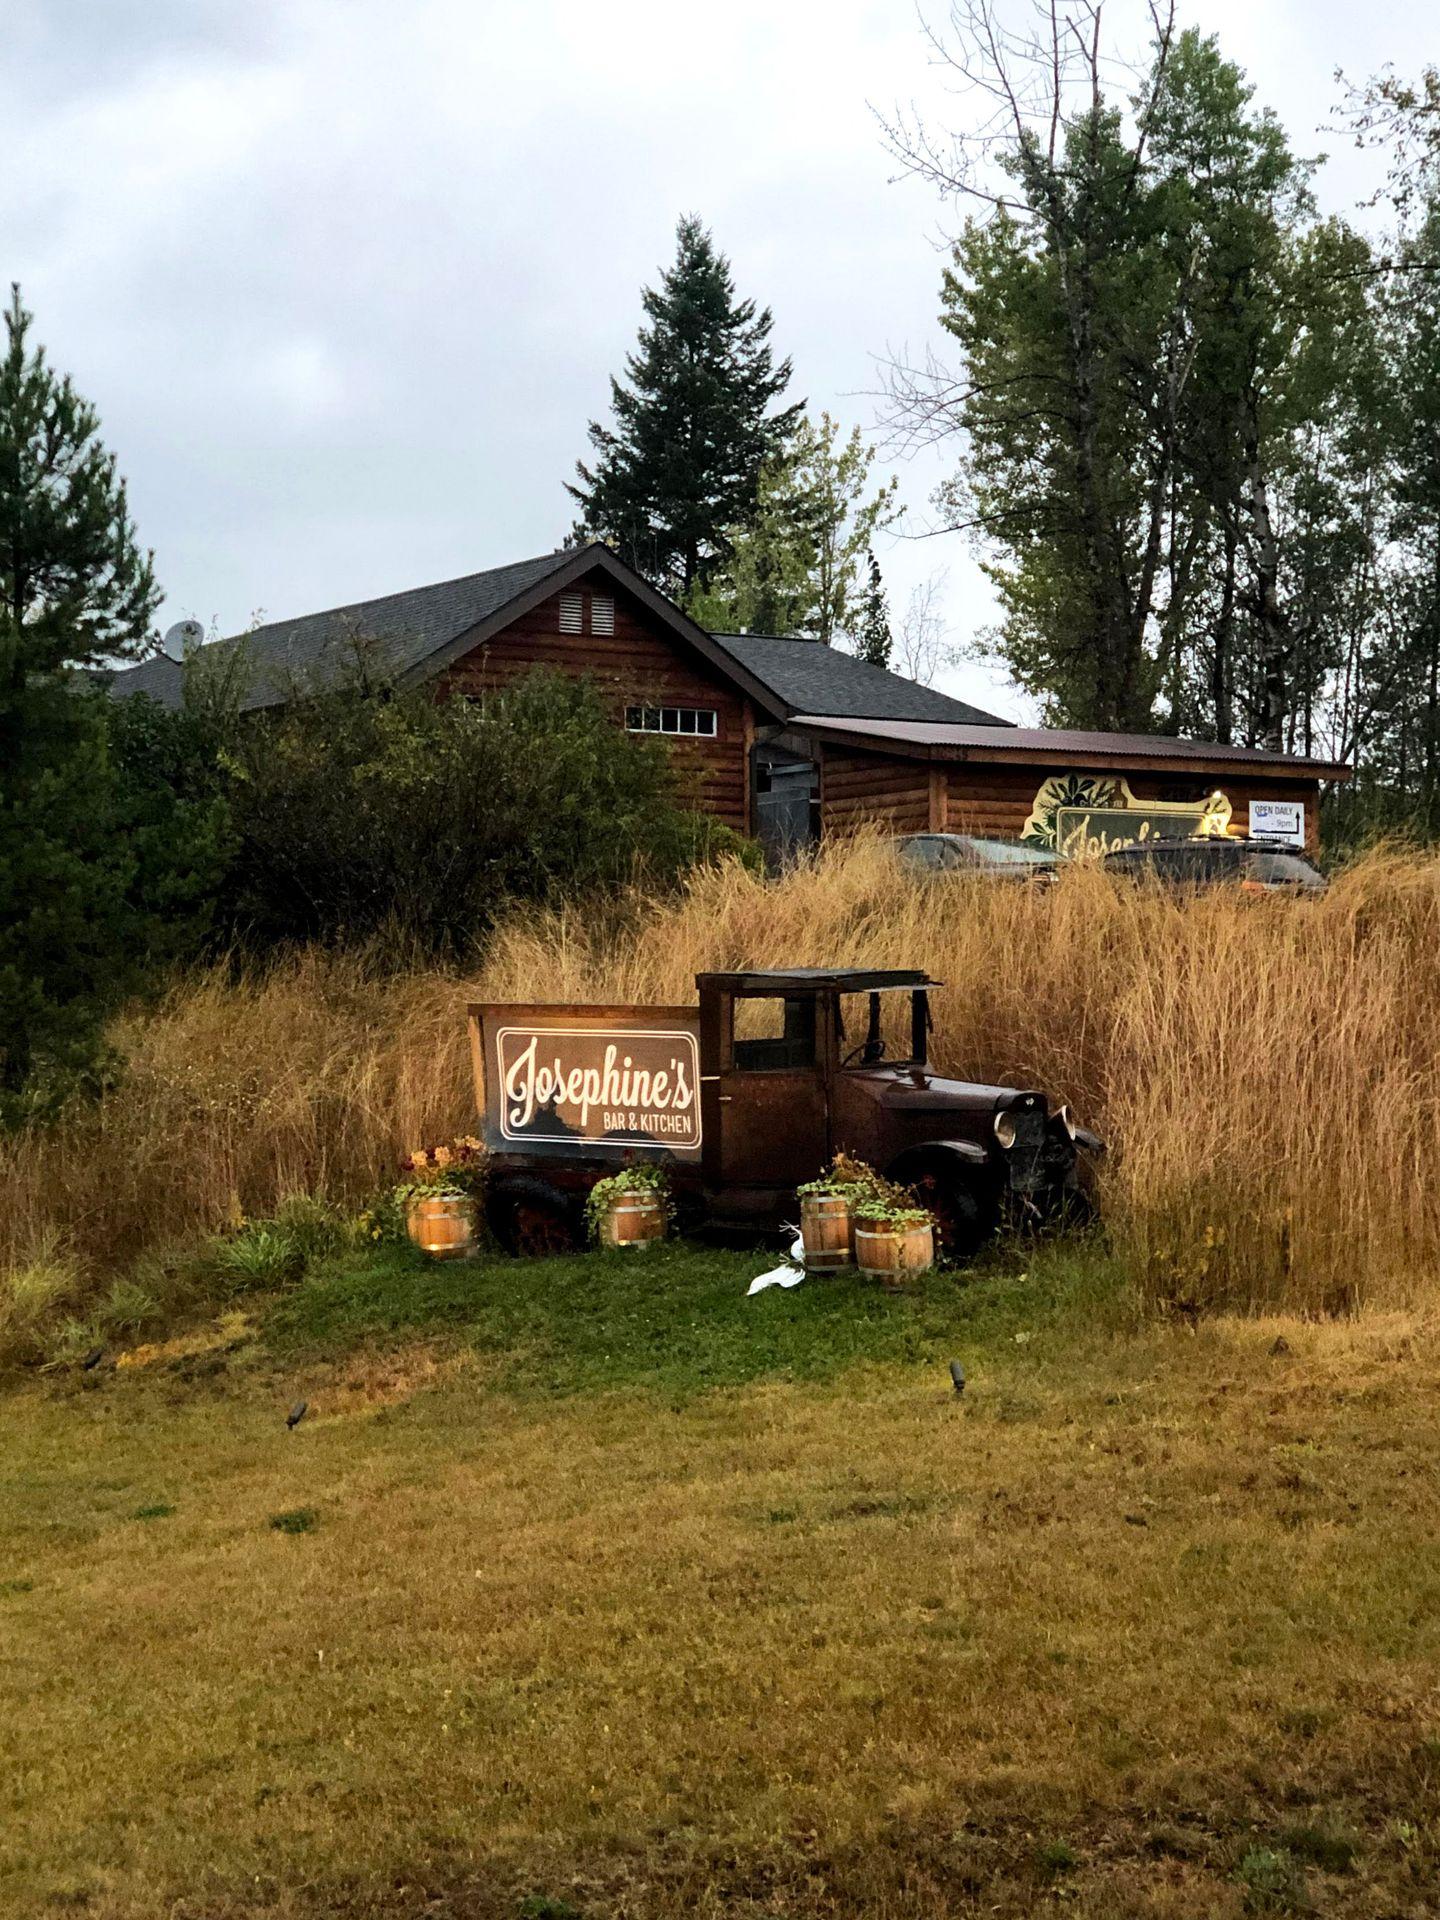 A vintage pick up truck in front of tall grass. There is a sign of Josephine's in the bed of the car.